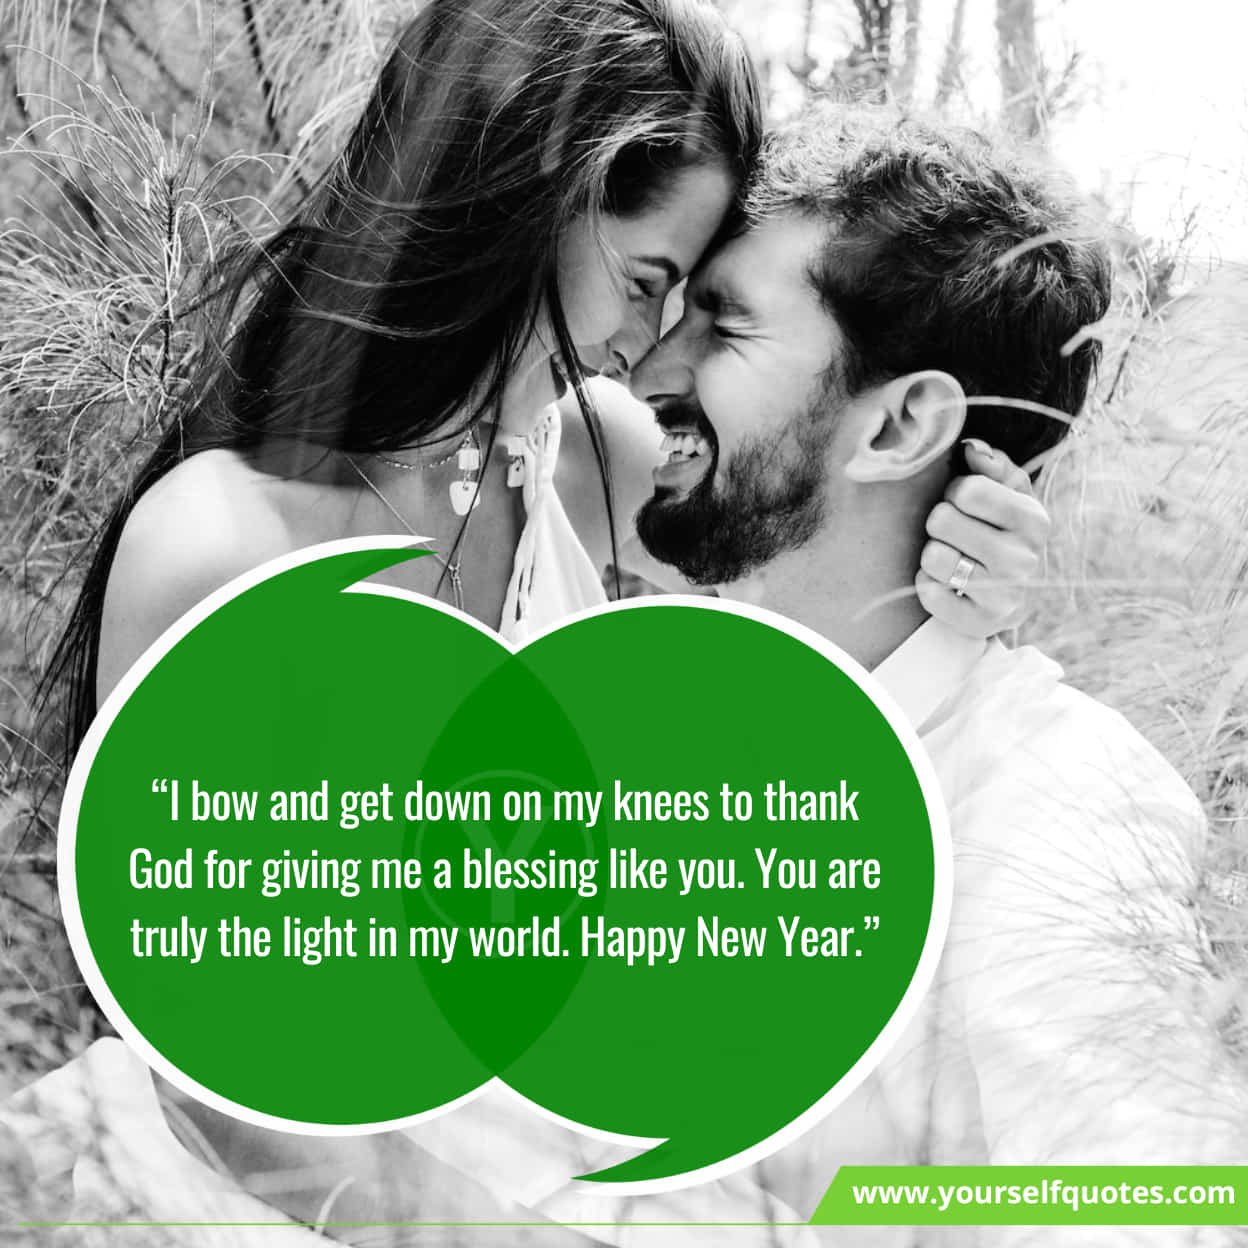 Charming Romantic New Year Messages